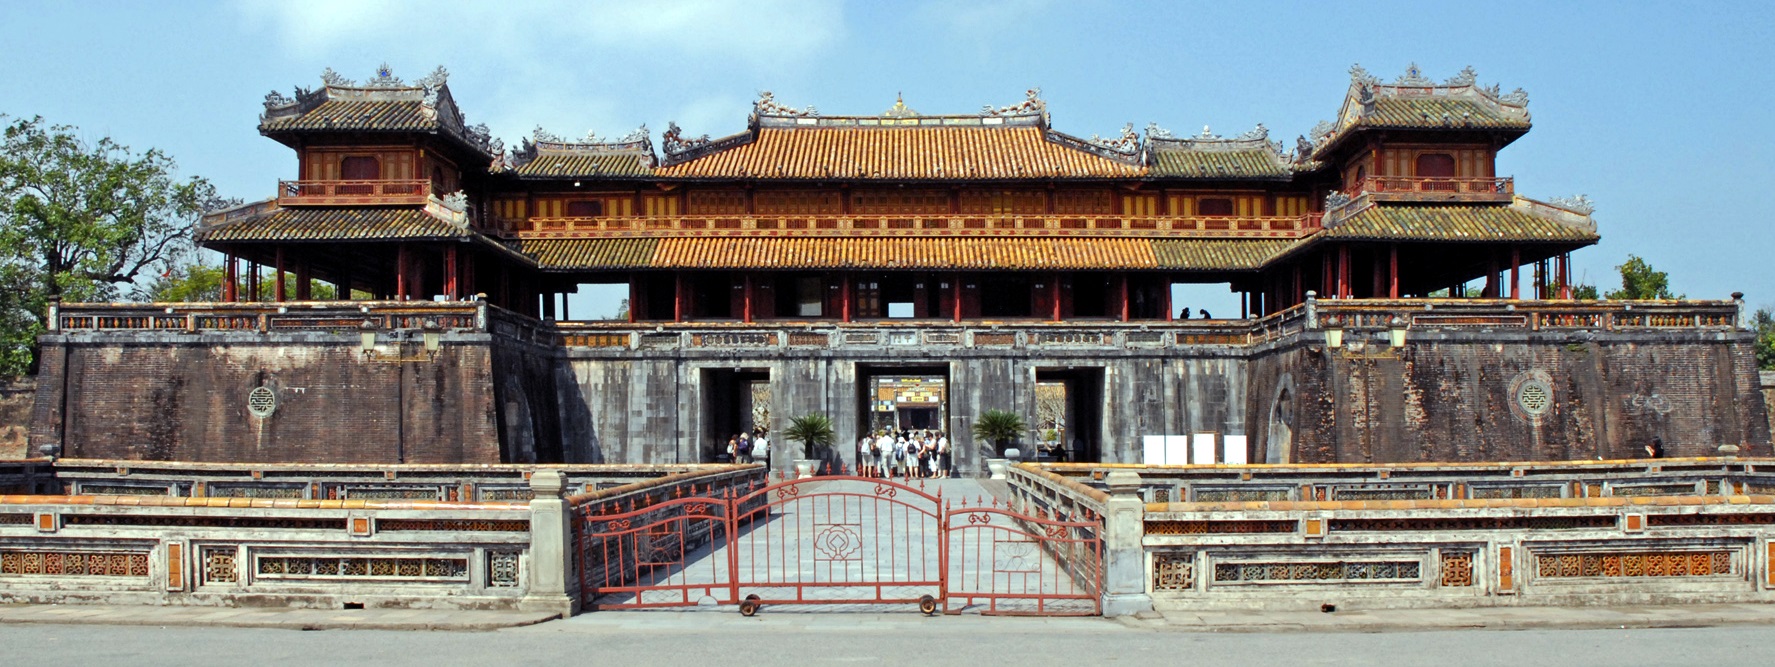 Ngo Mon - the Main Gate to the Citadel in Hue